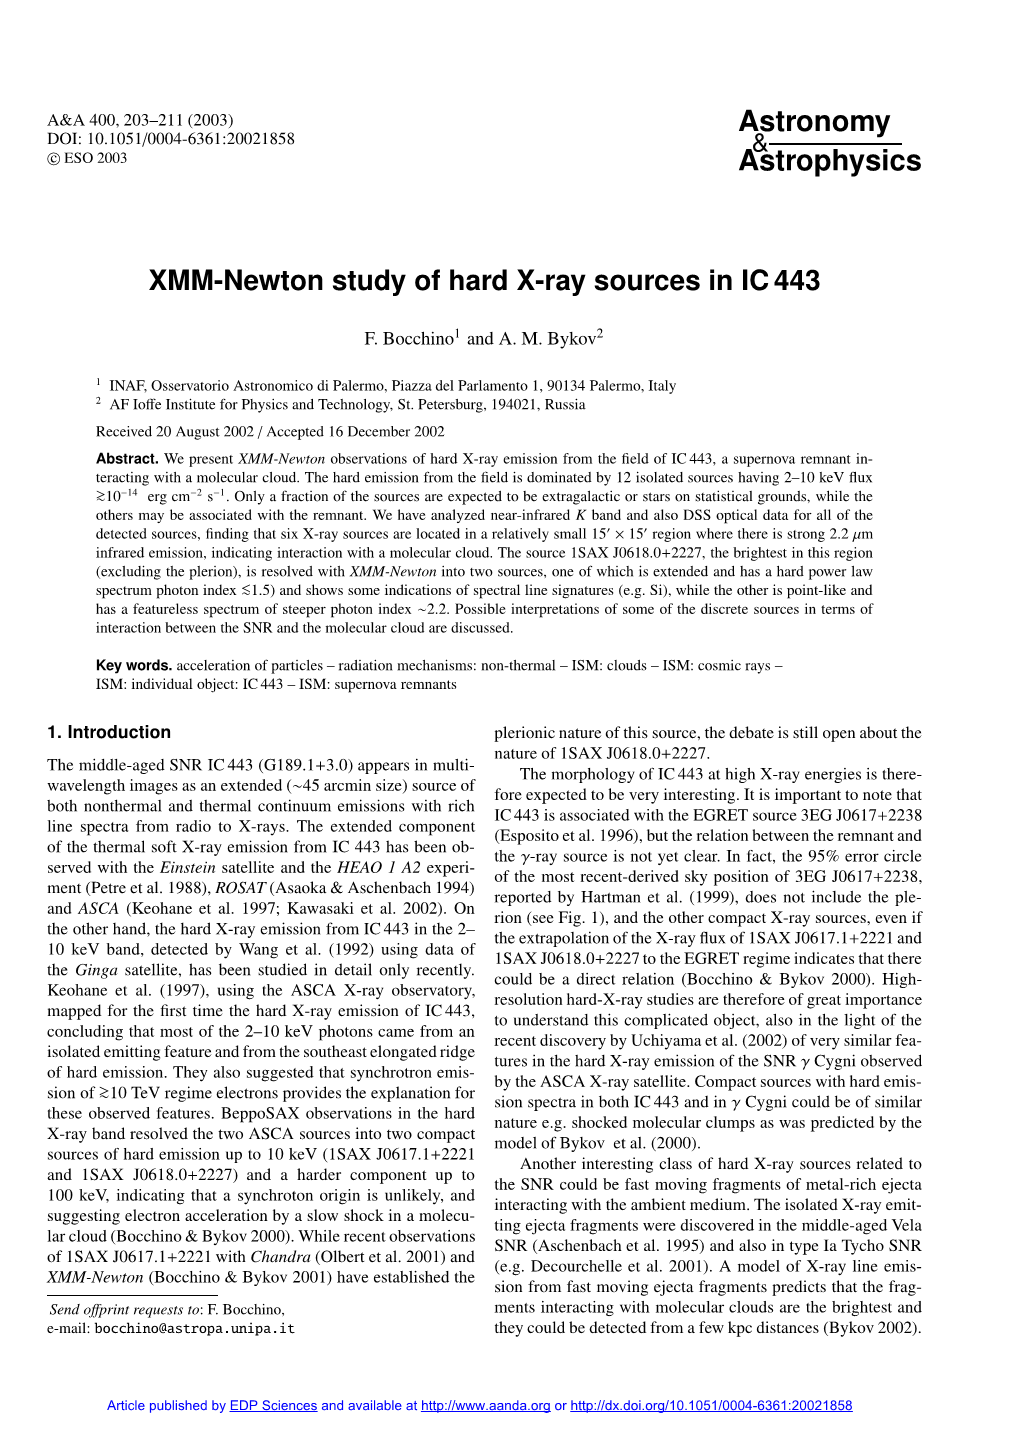 XMM-Newton Study of Hard X-Ray Sources in IC 443